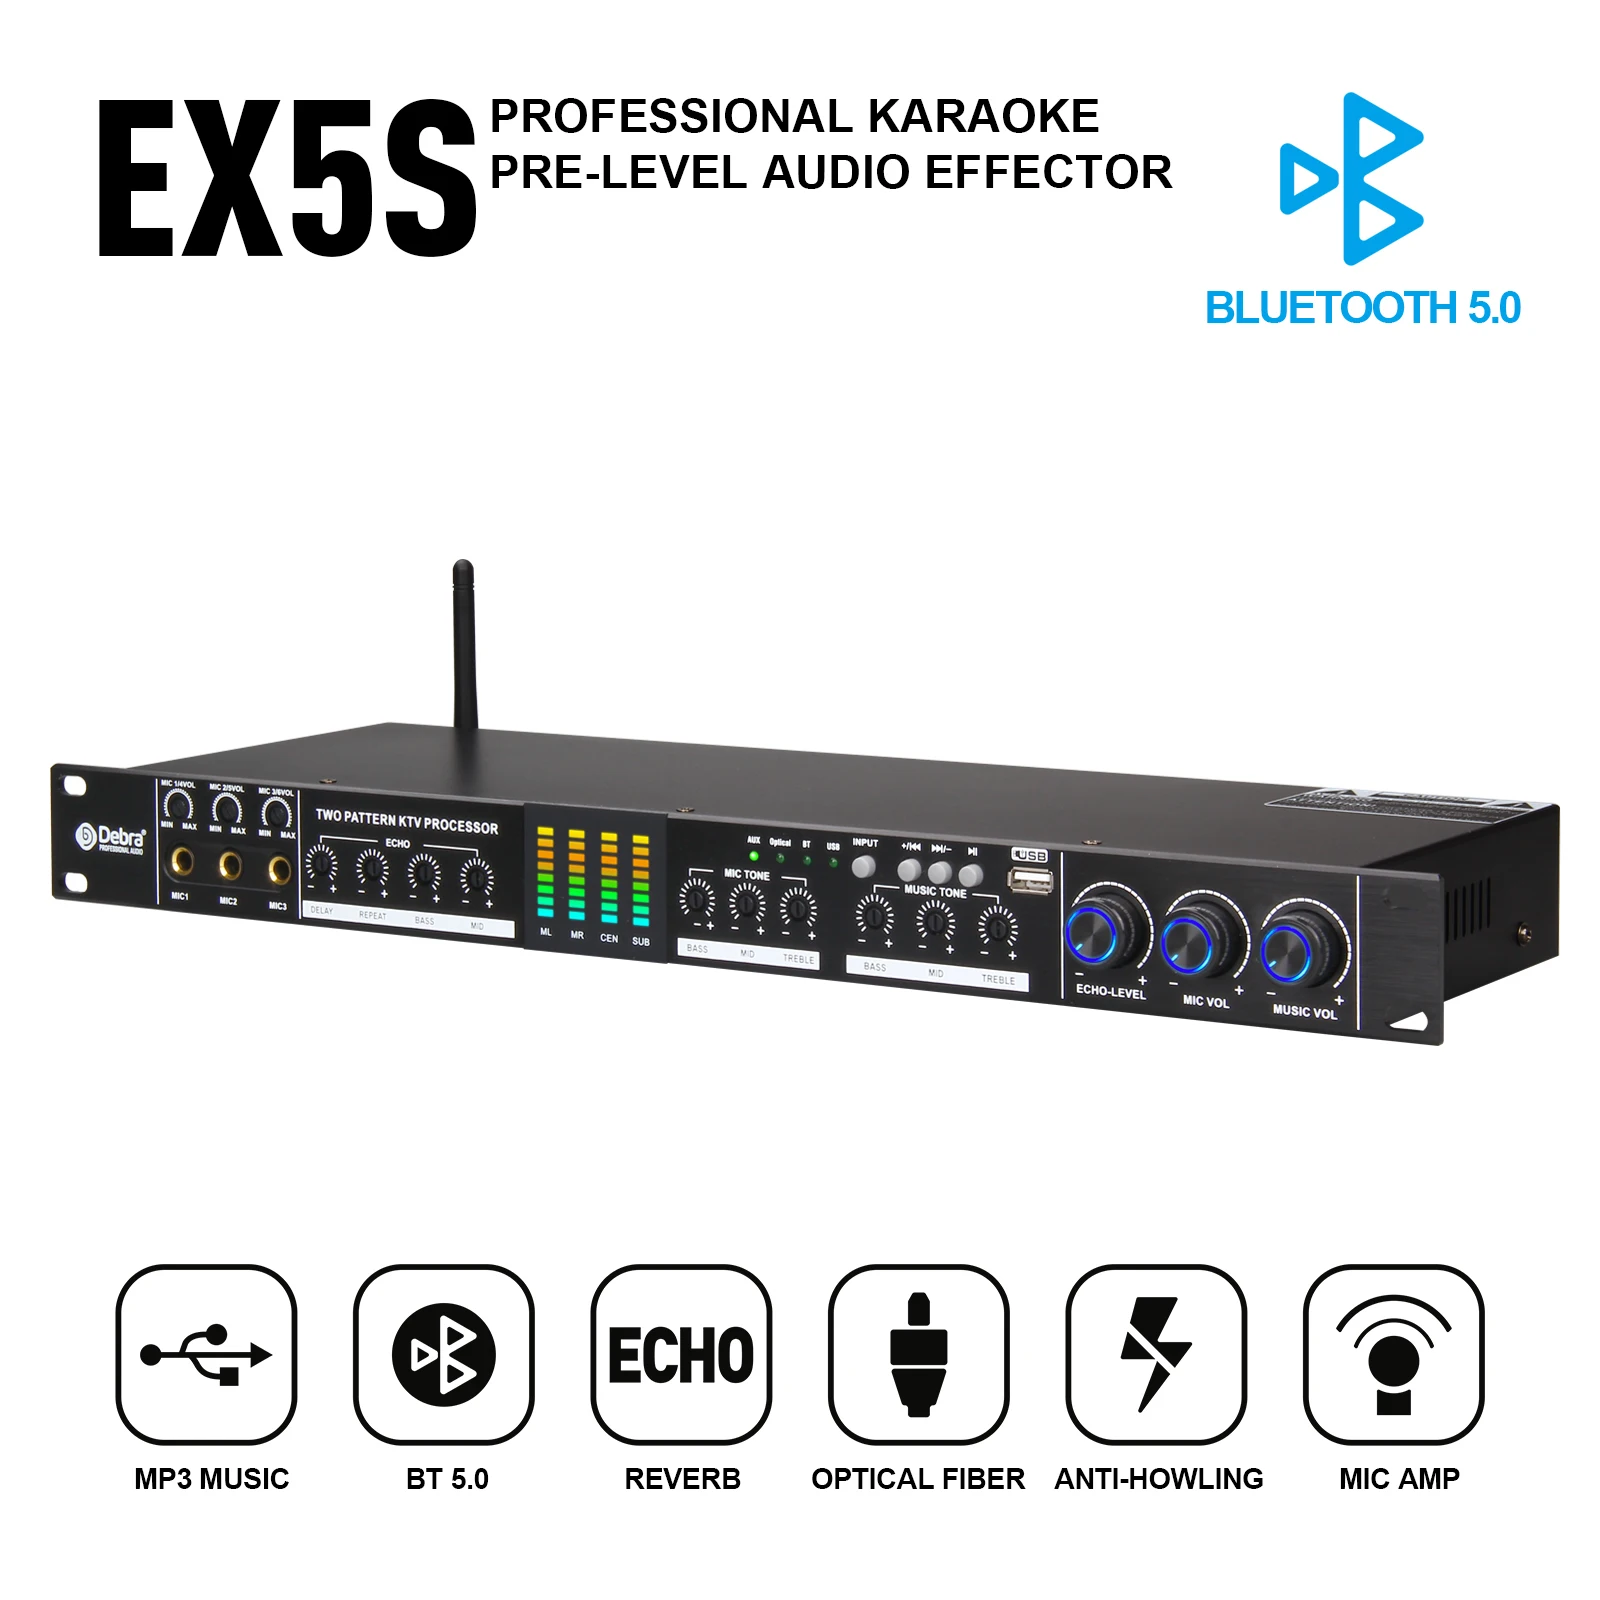 

EX5S Professional Audio Pre-Stage Reverb DSP Effector With 5.0 Bluetooth, Anti-howling, Mic AMP For Karaoke Performance Party.